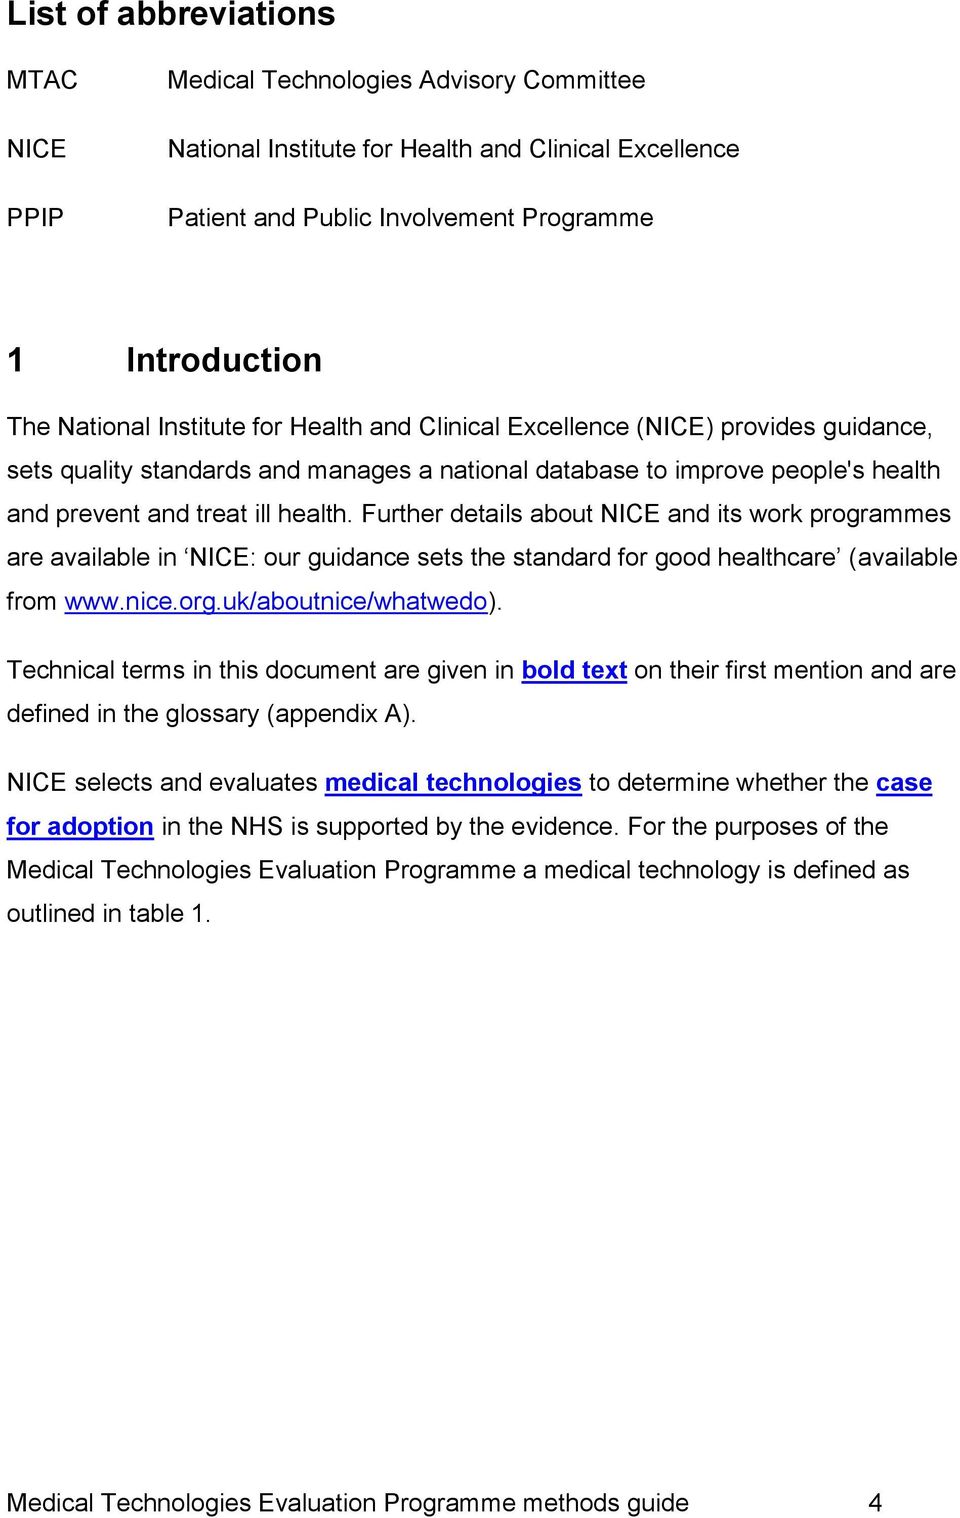 Further details about NICE and its work programmes are available in NICE: our guidance sets the standard for good healthcare (available from www.nice.org.uk/aboutnice/whatwedo).